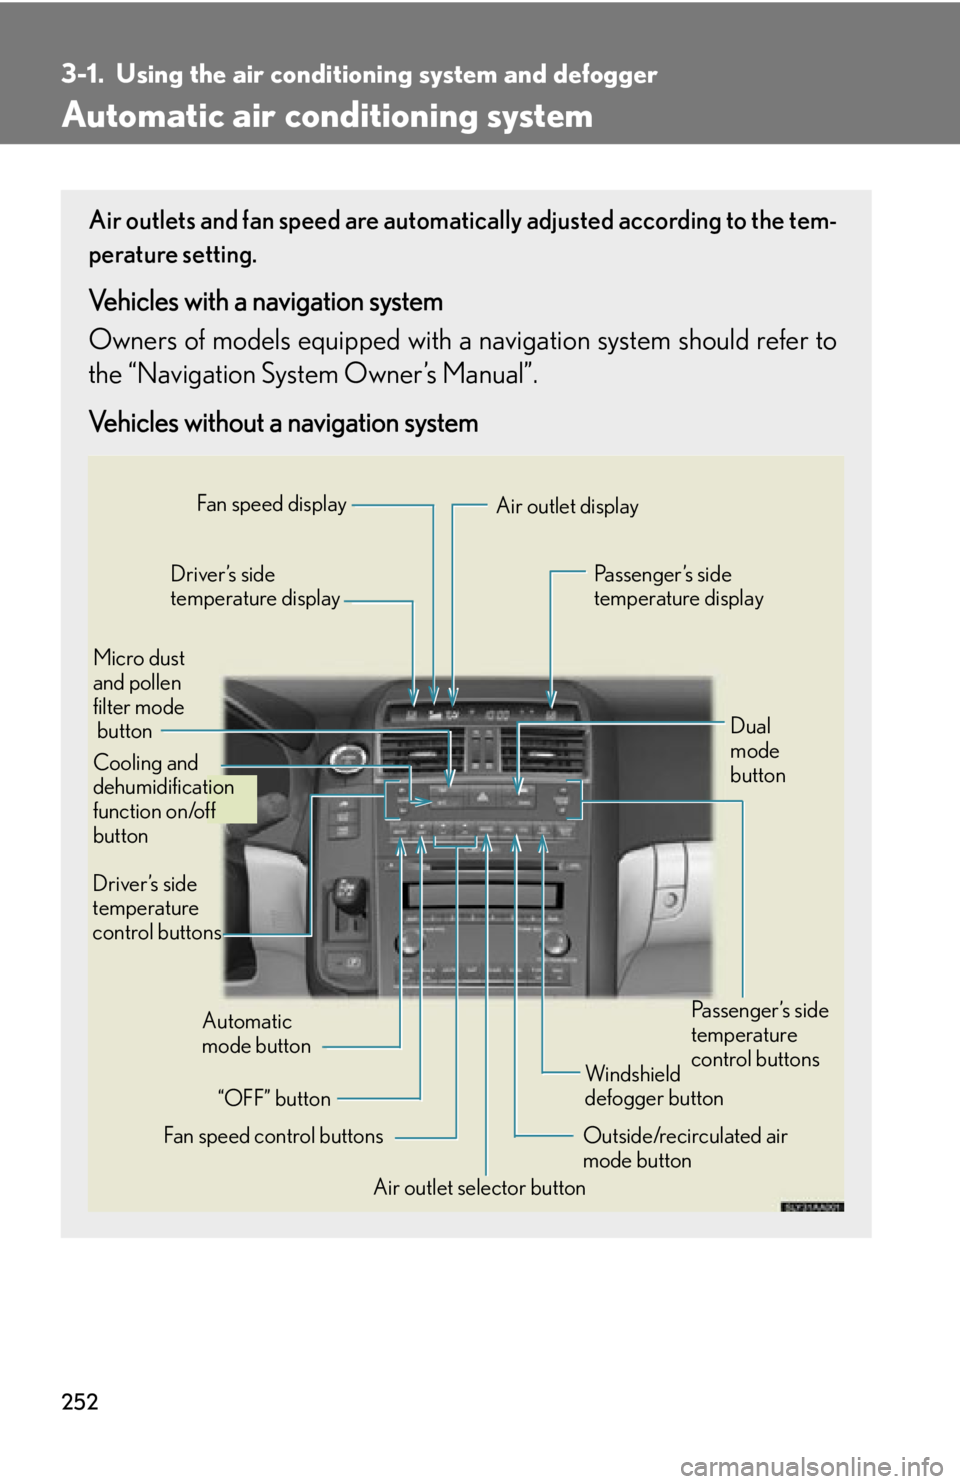 Lexus HS250h 2010  Basic Information Before Operation / LEXUS 2010 HS250H OWNERS MANUAL (OM75006U) 252
3-1. Using the air conditioning system and defogger
Automatic air conditioning system
Air outlets and fan speed are automati cally adjusted according to the tem-
perature setting.
Vehicles with a 